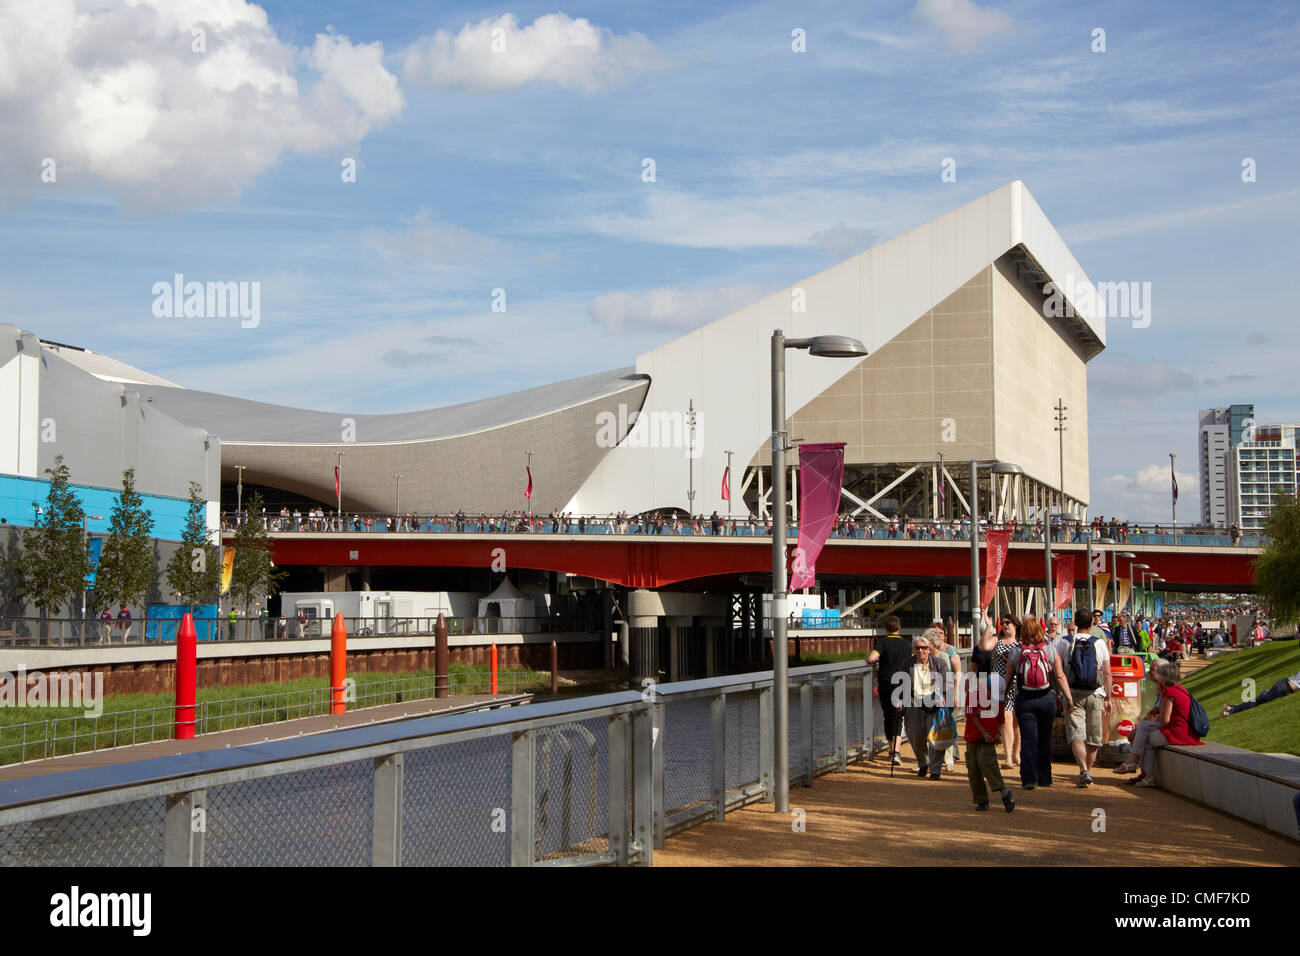 Aquatics Centre and River Lea on a sunny day at Olympic Park, London 2012 Olympic Games site, Stratford London E20 UK, Stock Photo